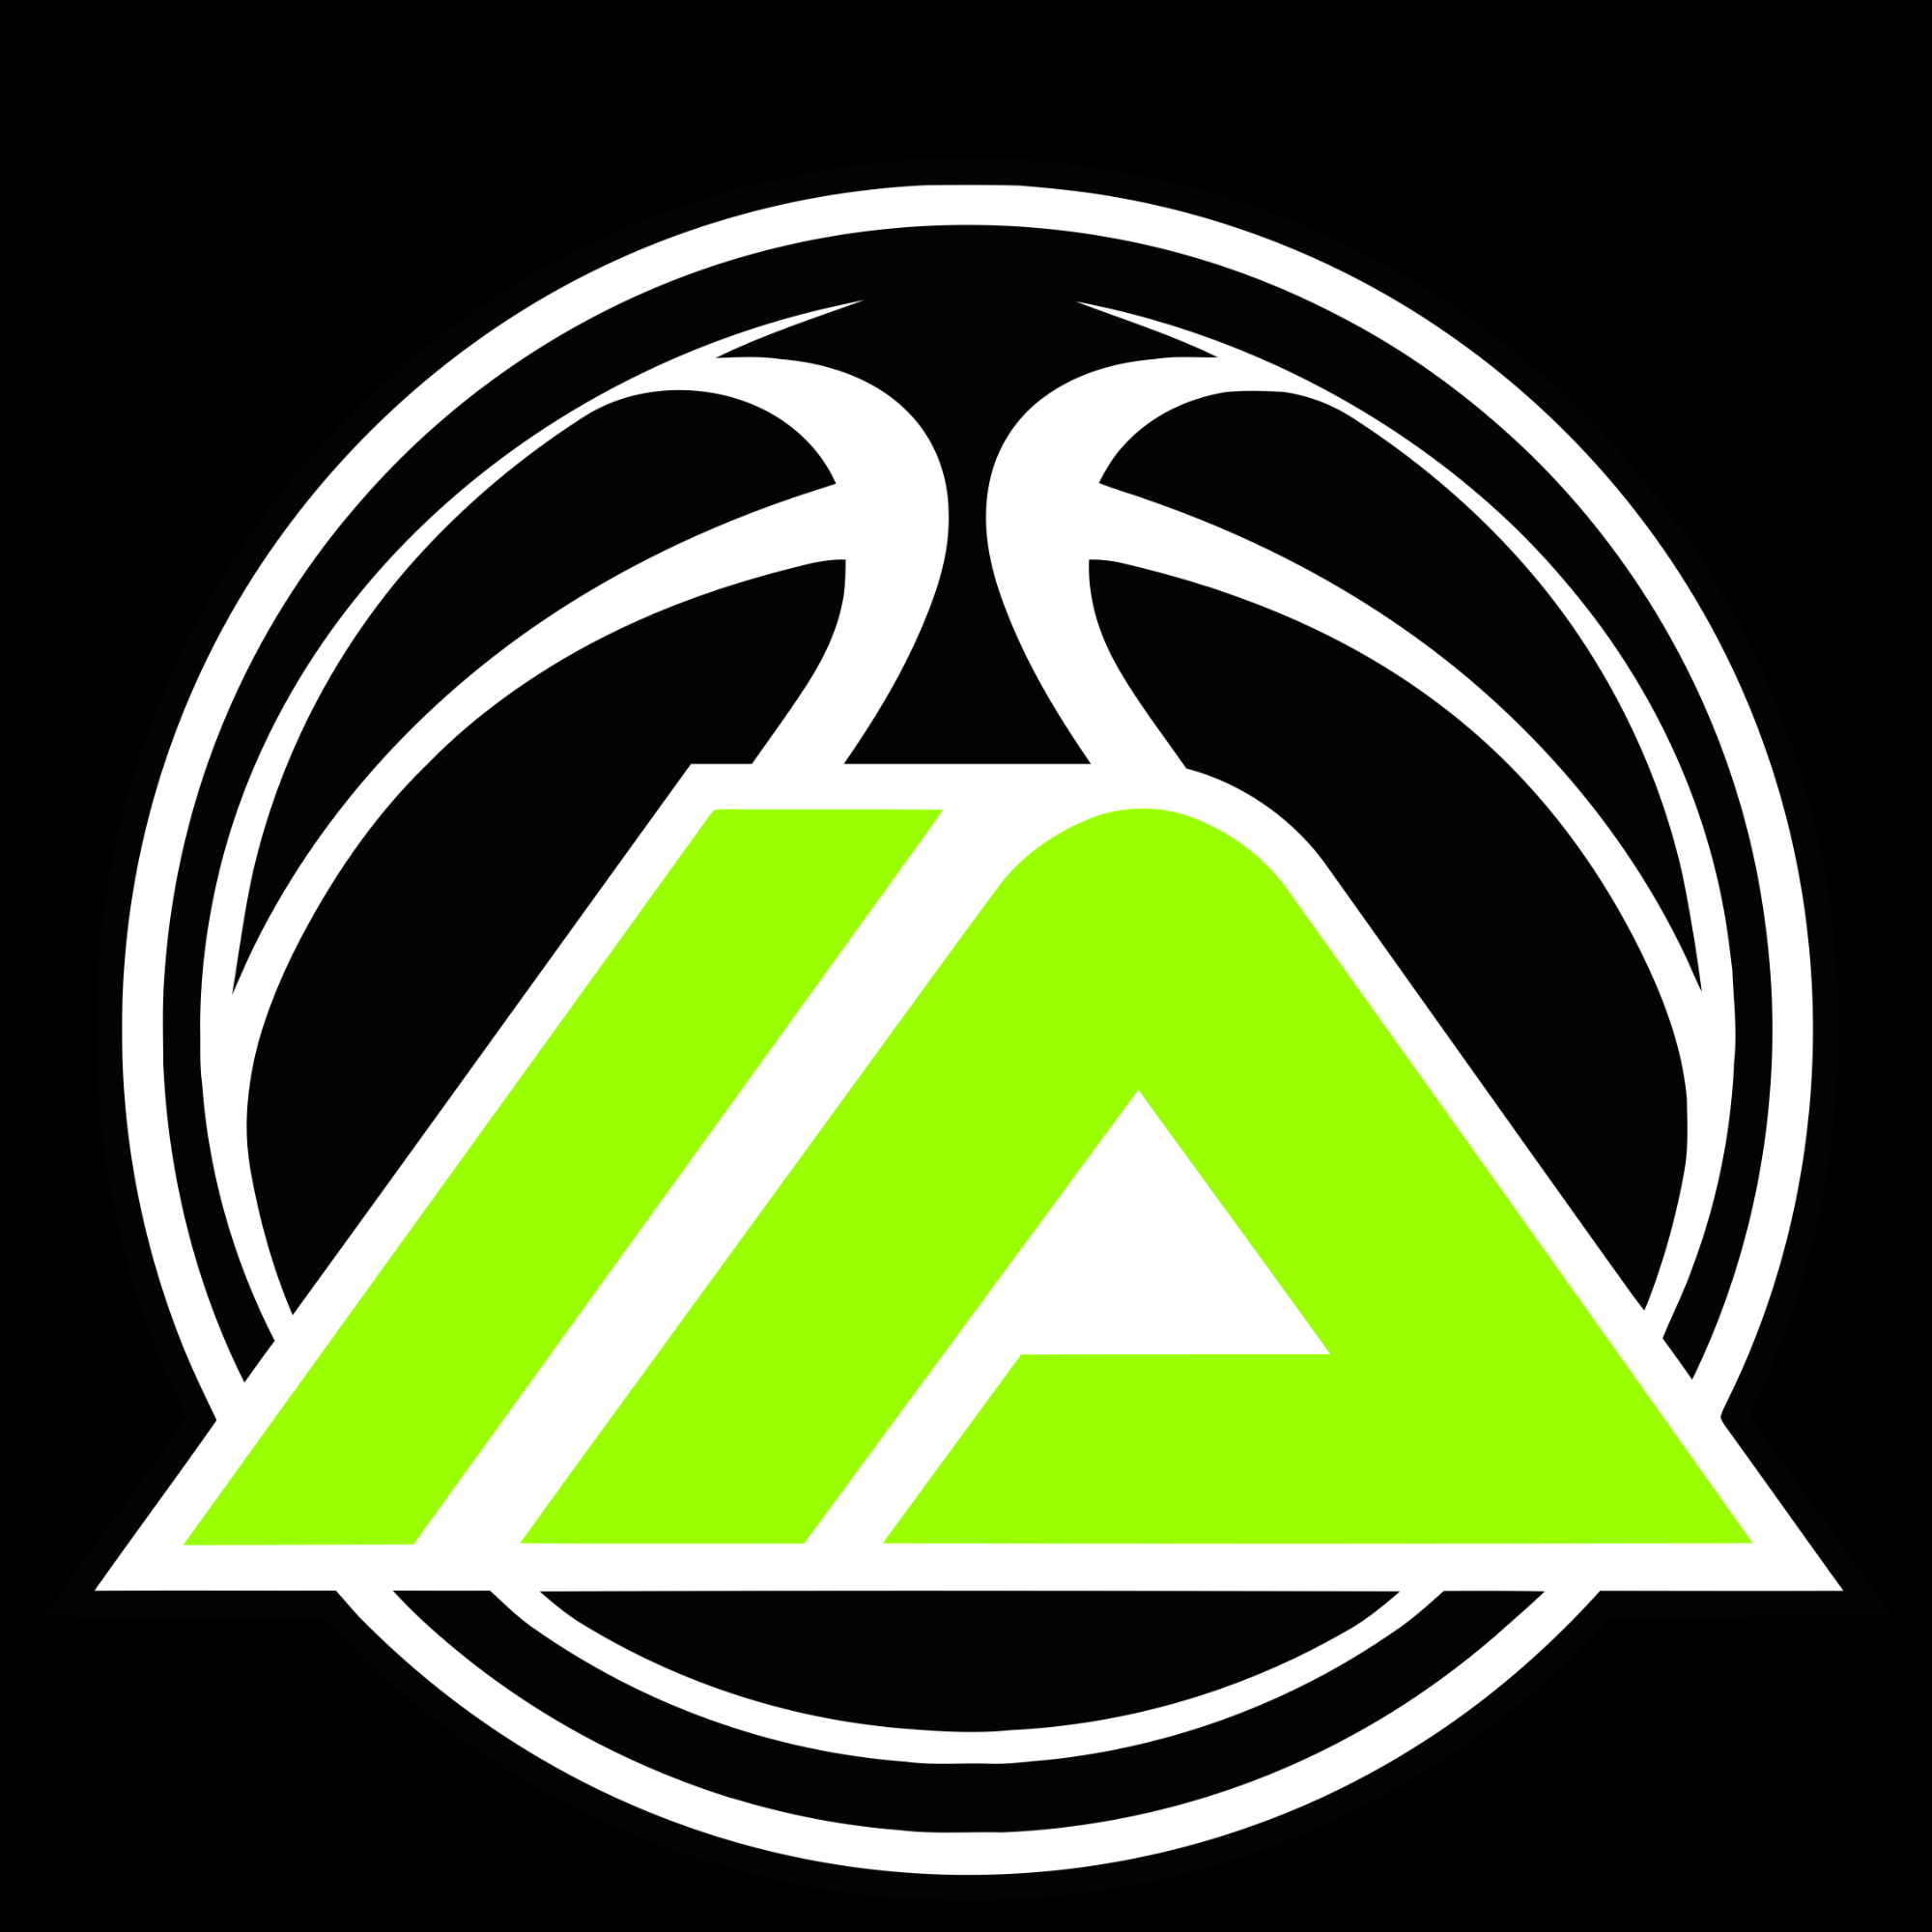 The official logo of Inspired Athletics